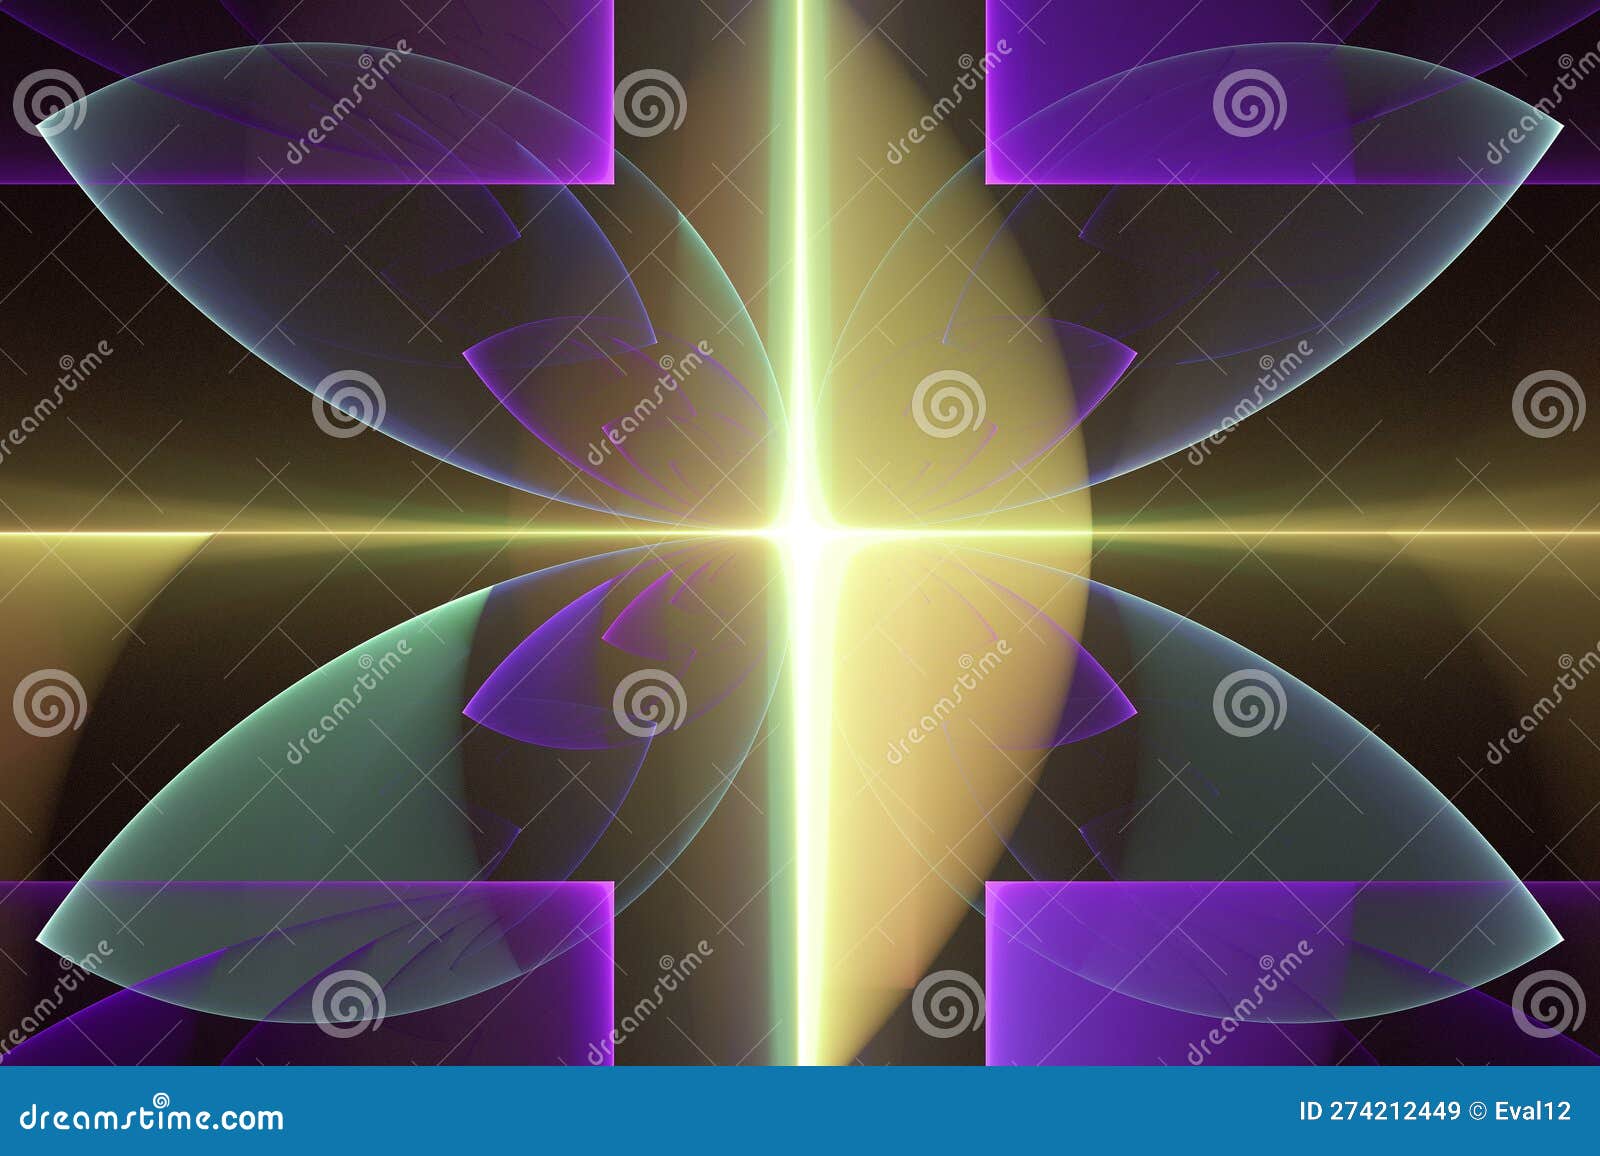 Orange Purple Glowing Pattern Of Curved Shapes And Rays On A Black Background Stock